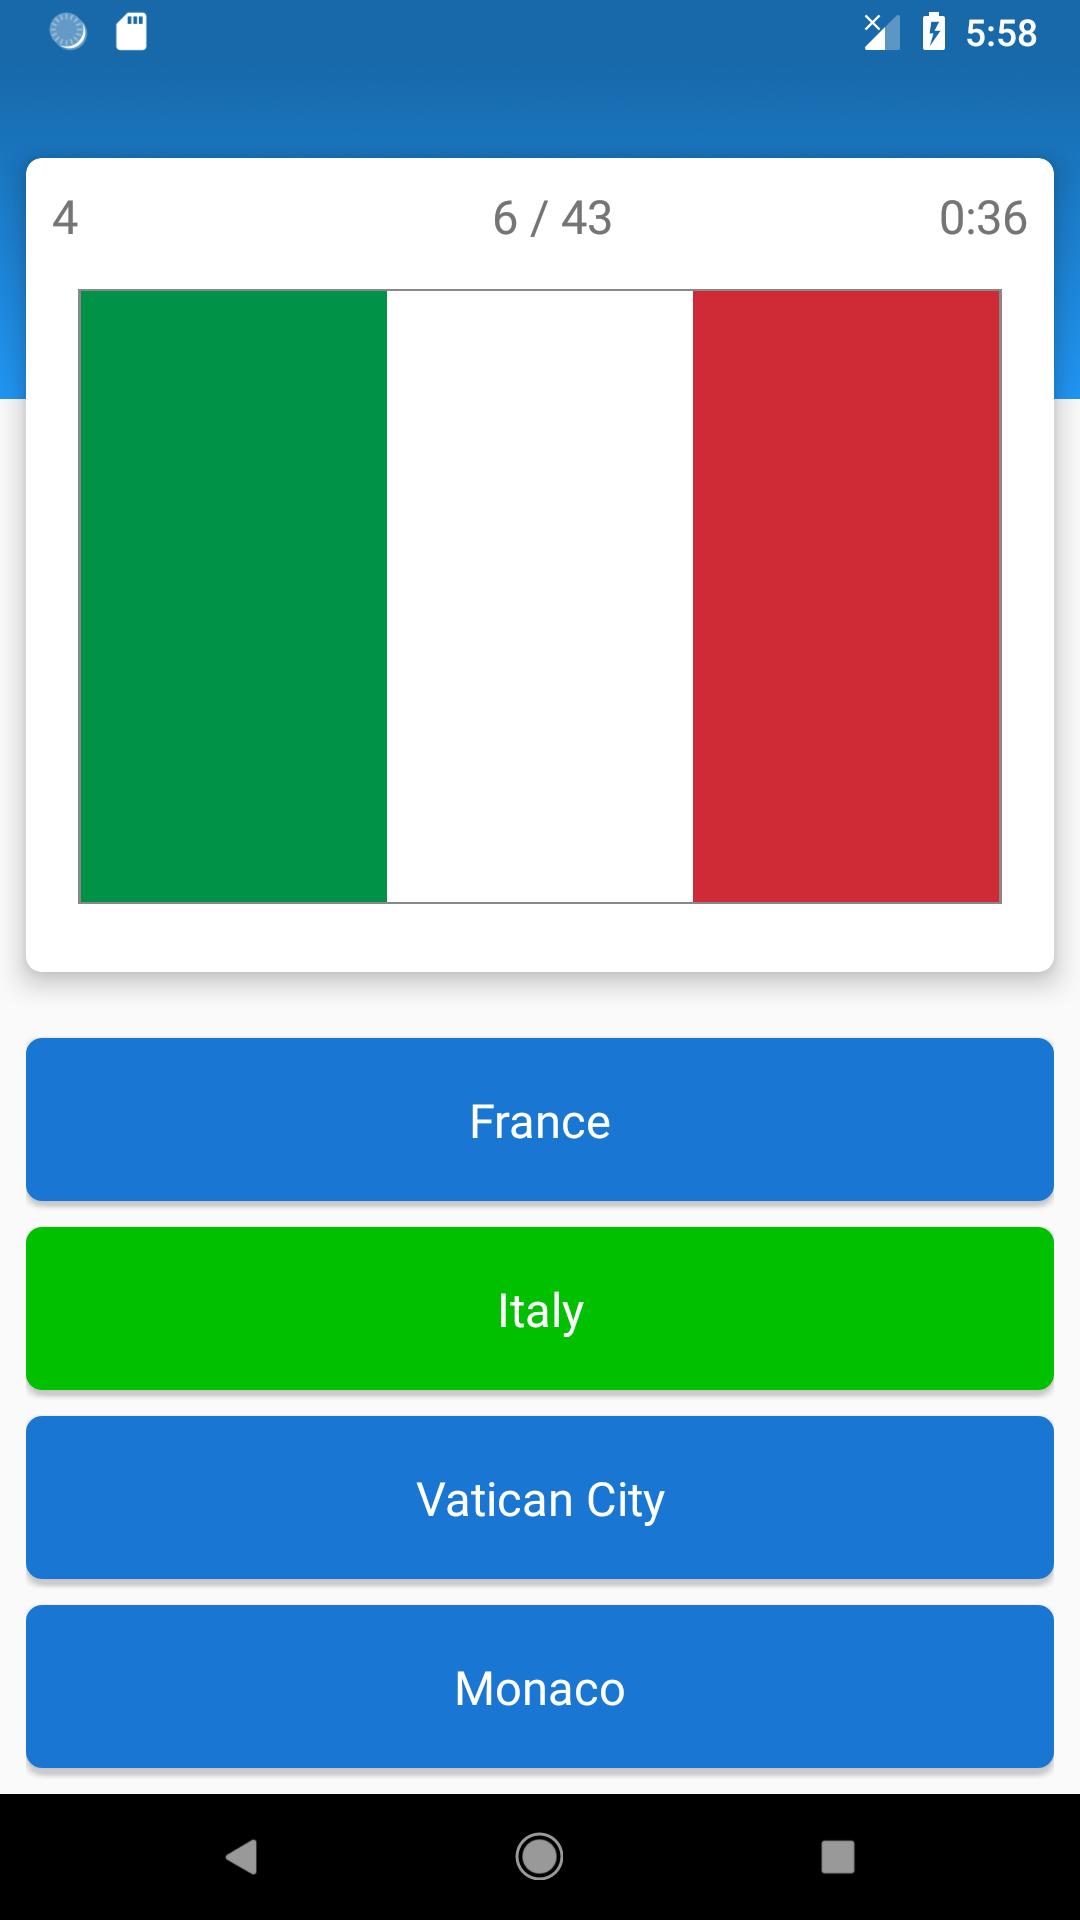 Cruelty Diktatur elegant Guess the country! - Quiz of capitals and flags for Android - APK Download